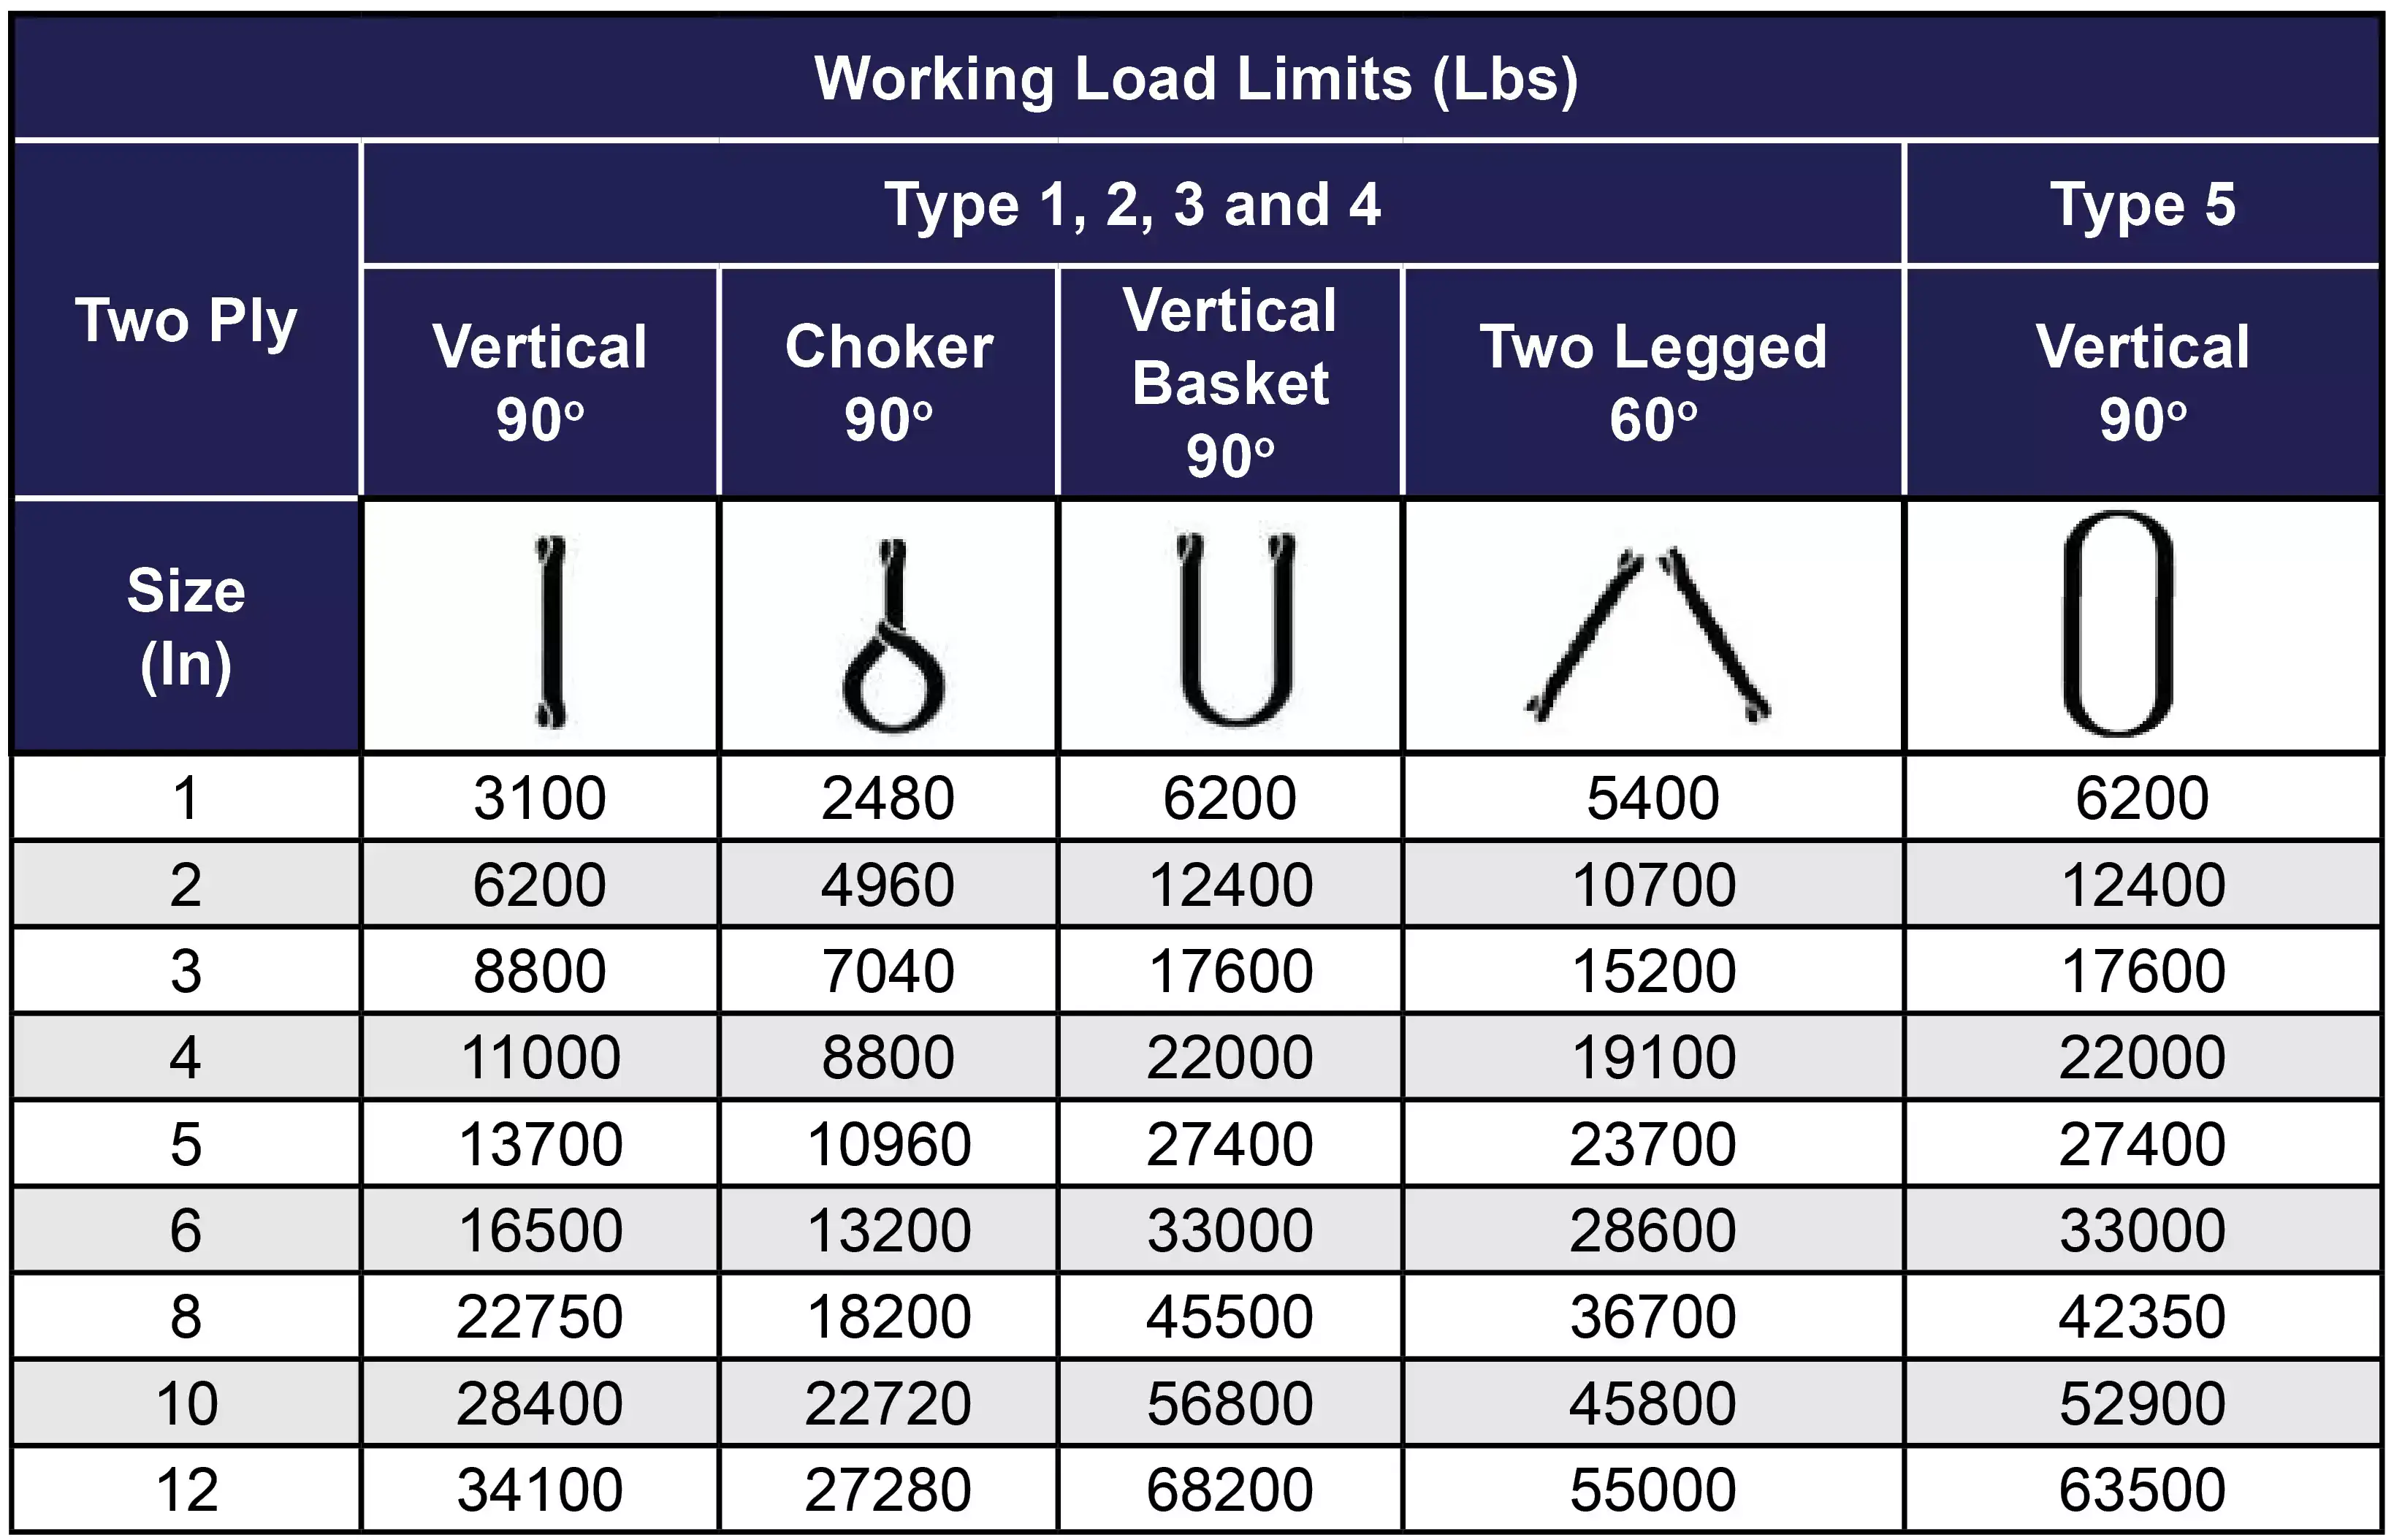 graphic outlining the change in working load limits associated with different two-ply web sling configurations and hitches